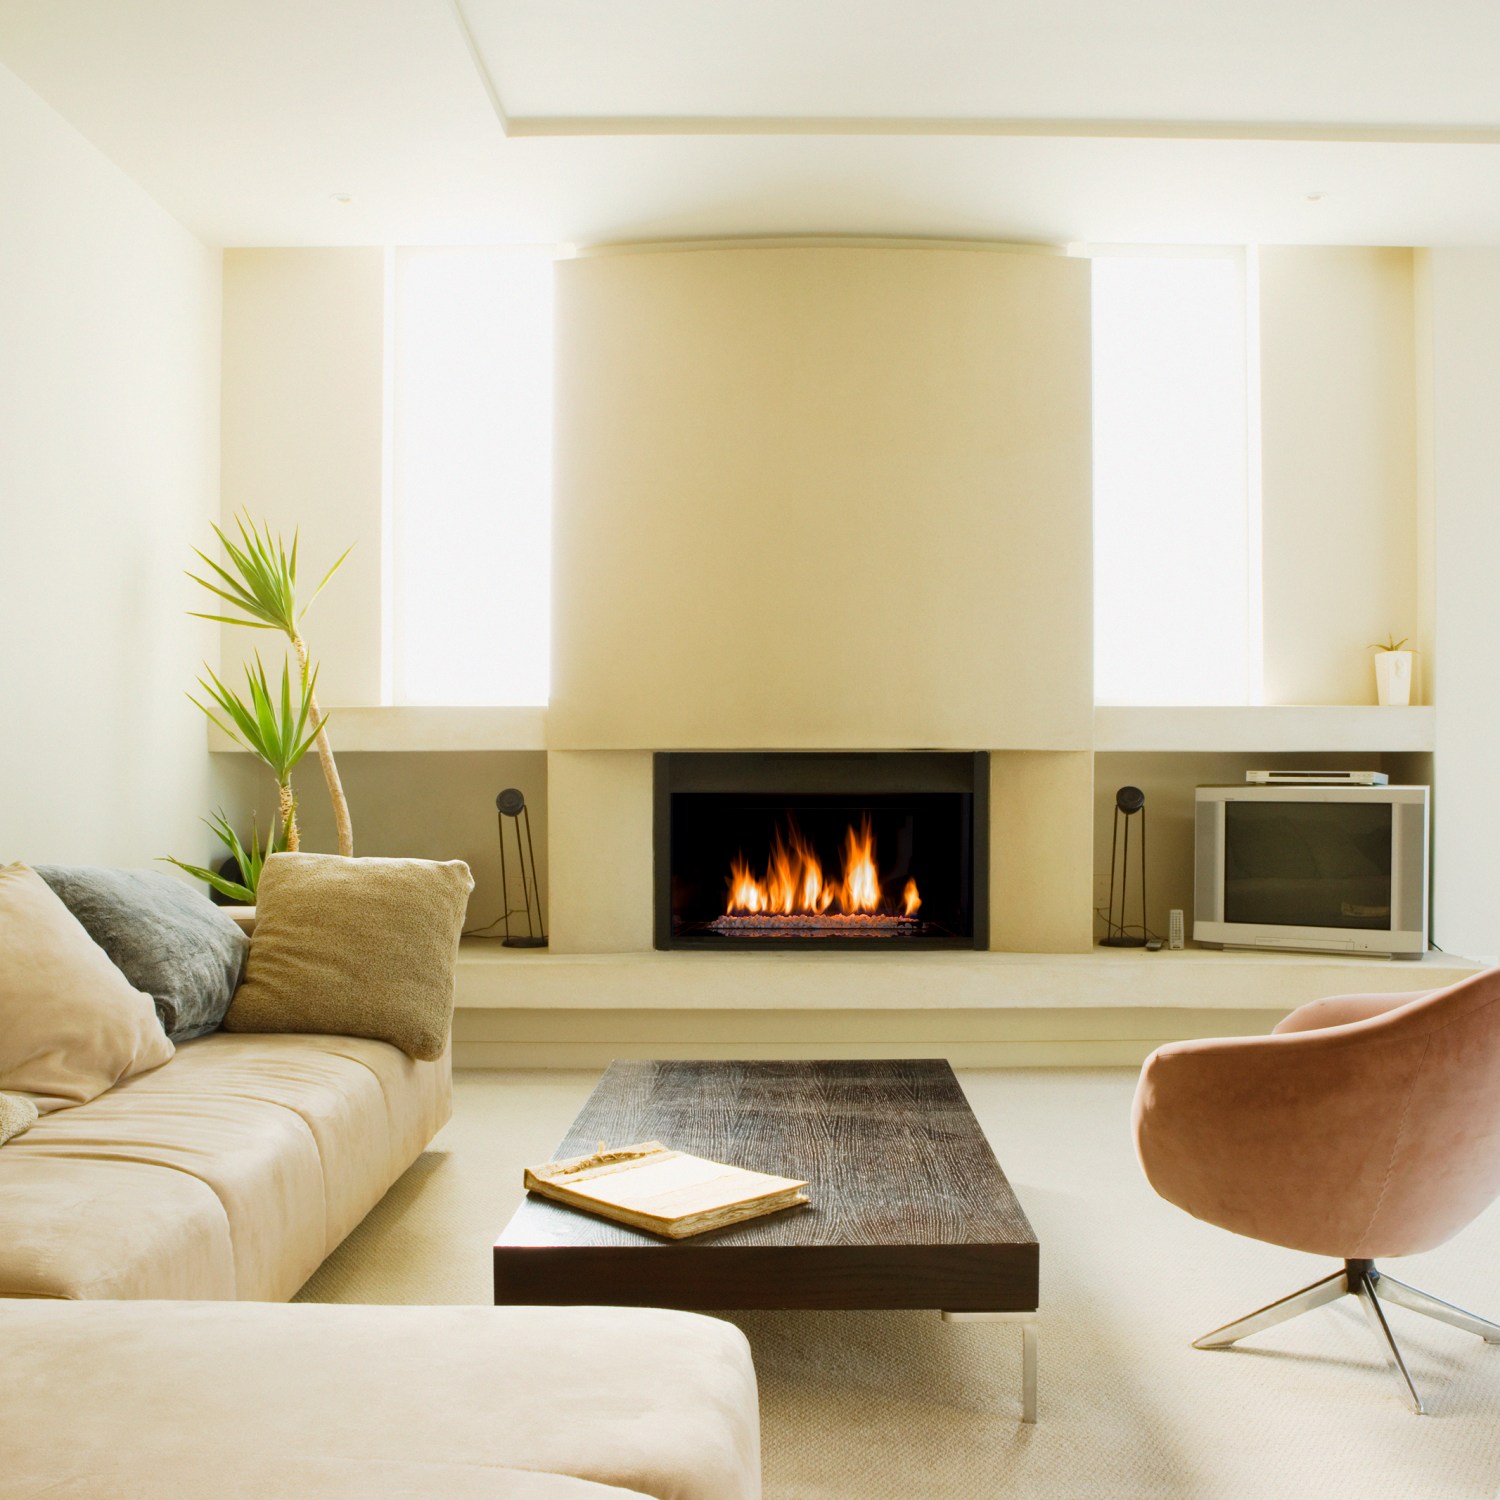 Gas fireplace in a modern home